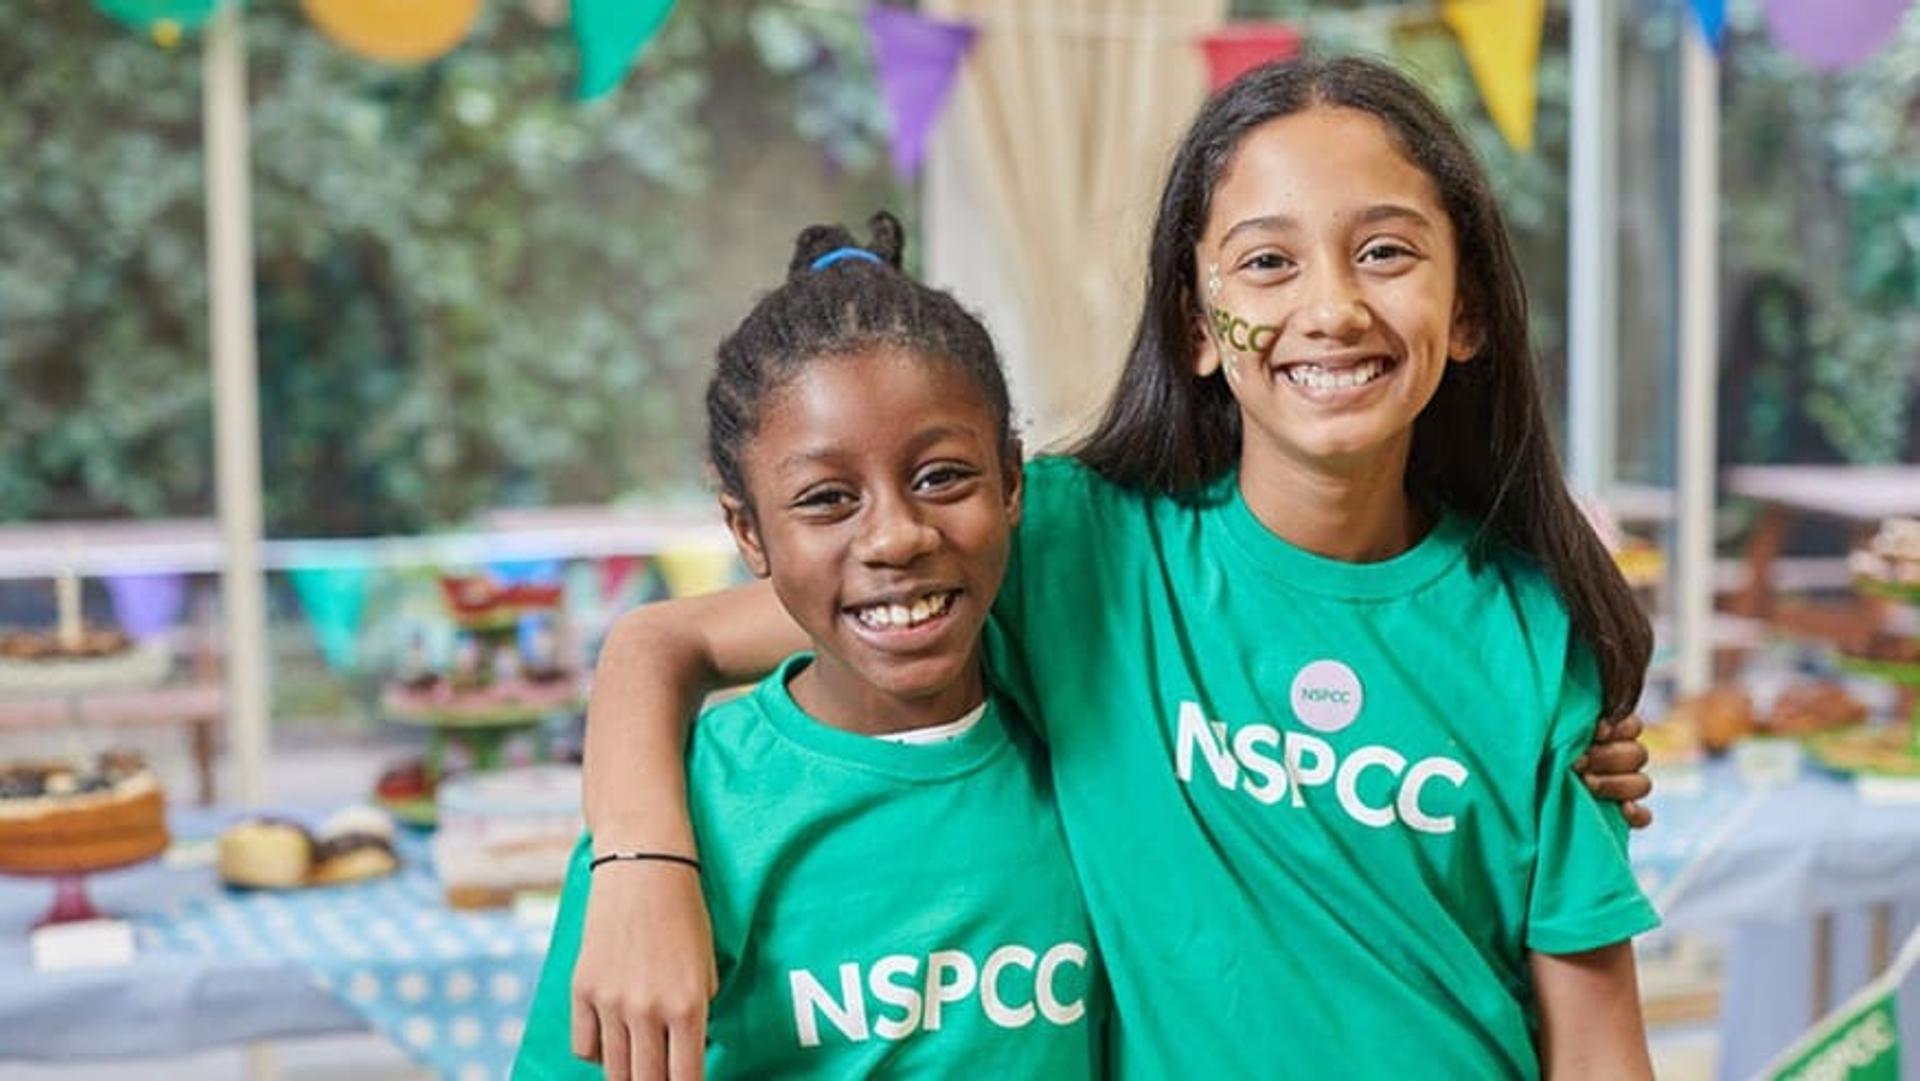 NSPCC - Chief Technology Officer